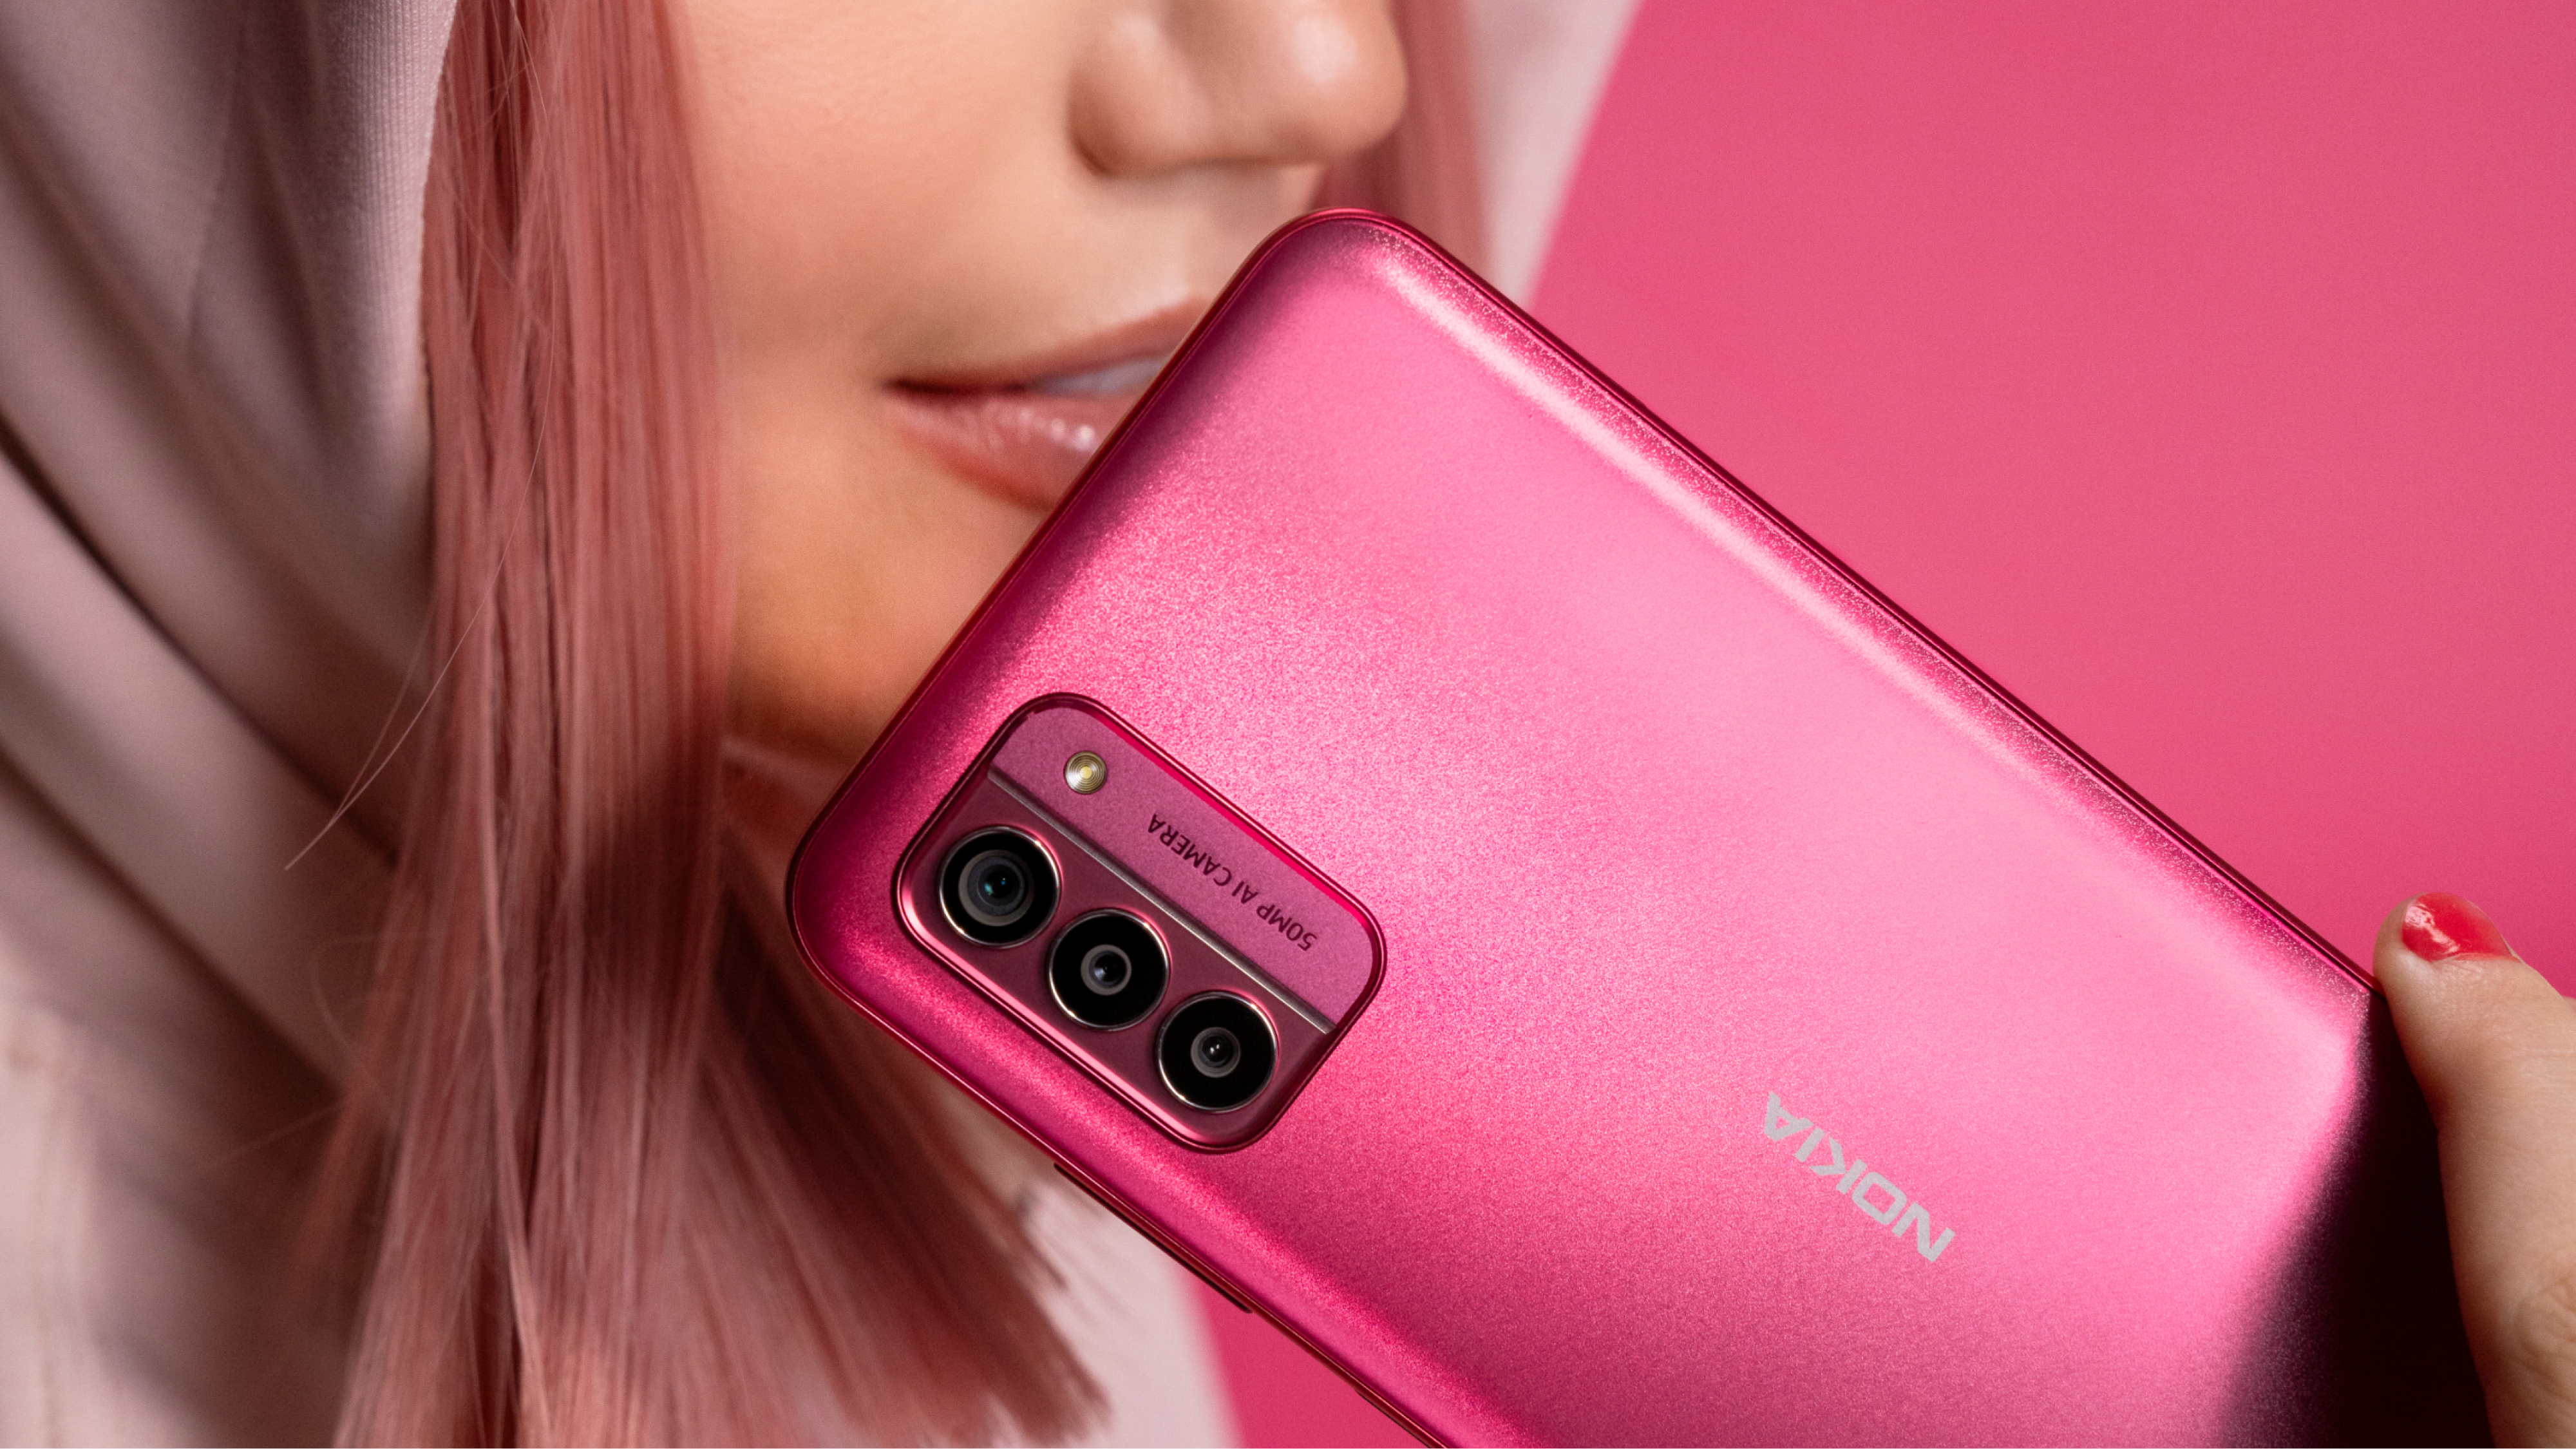 Repairable and fashionable: Nokia G42 goes Pink So 5G